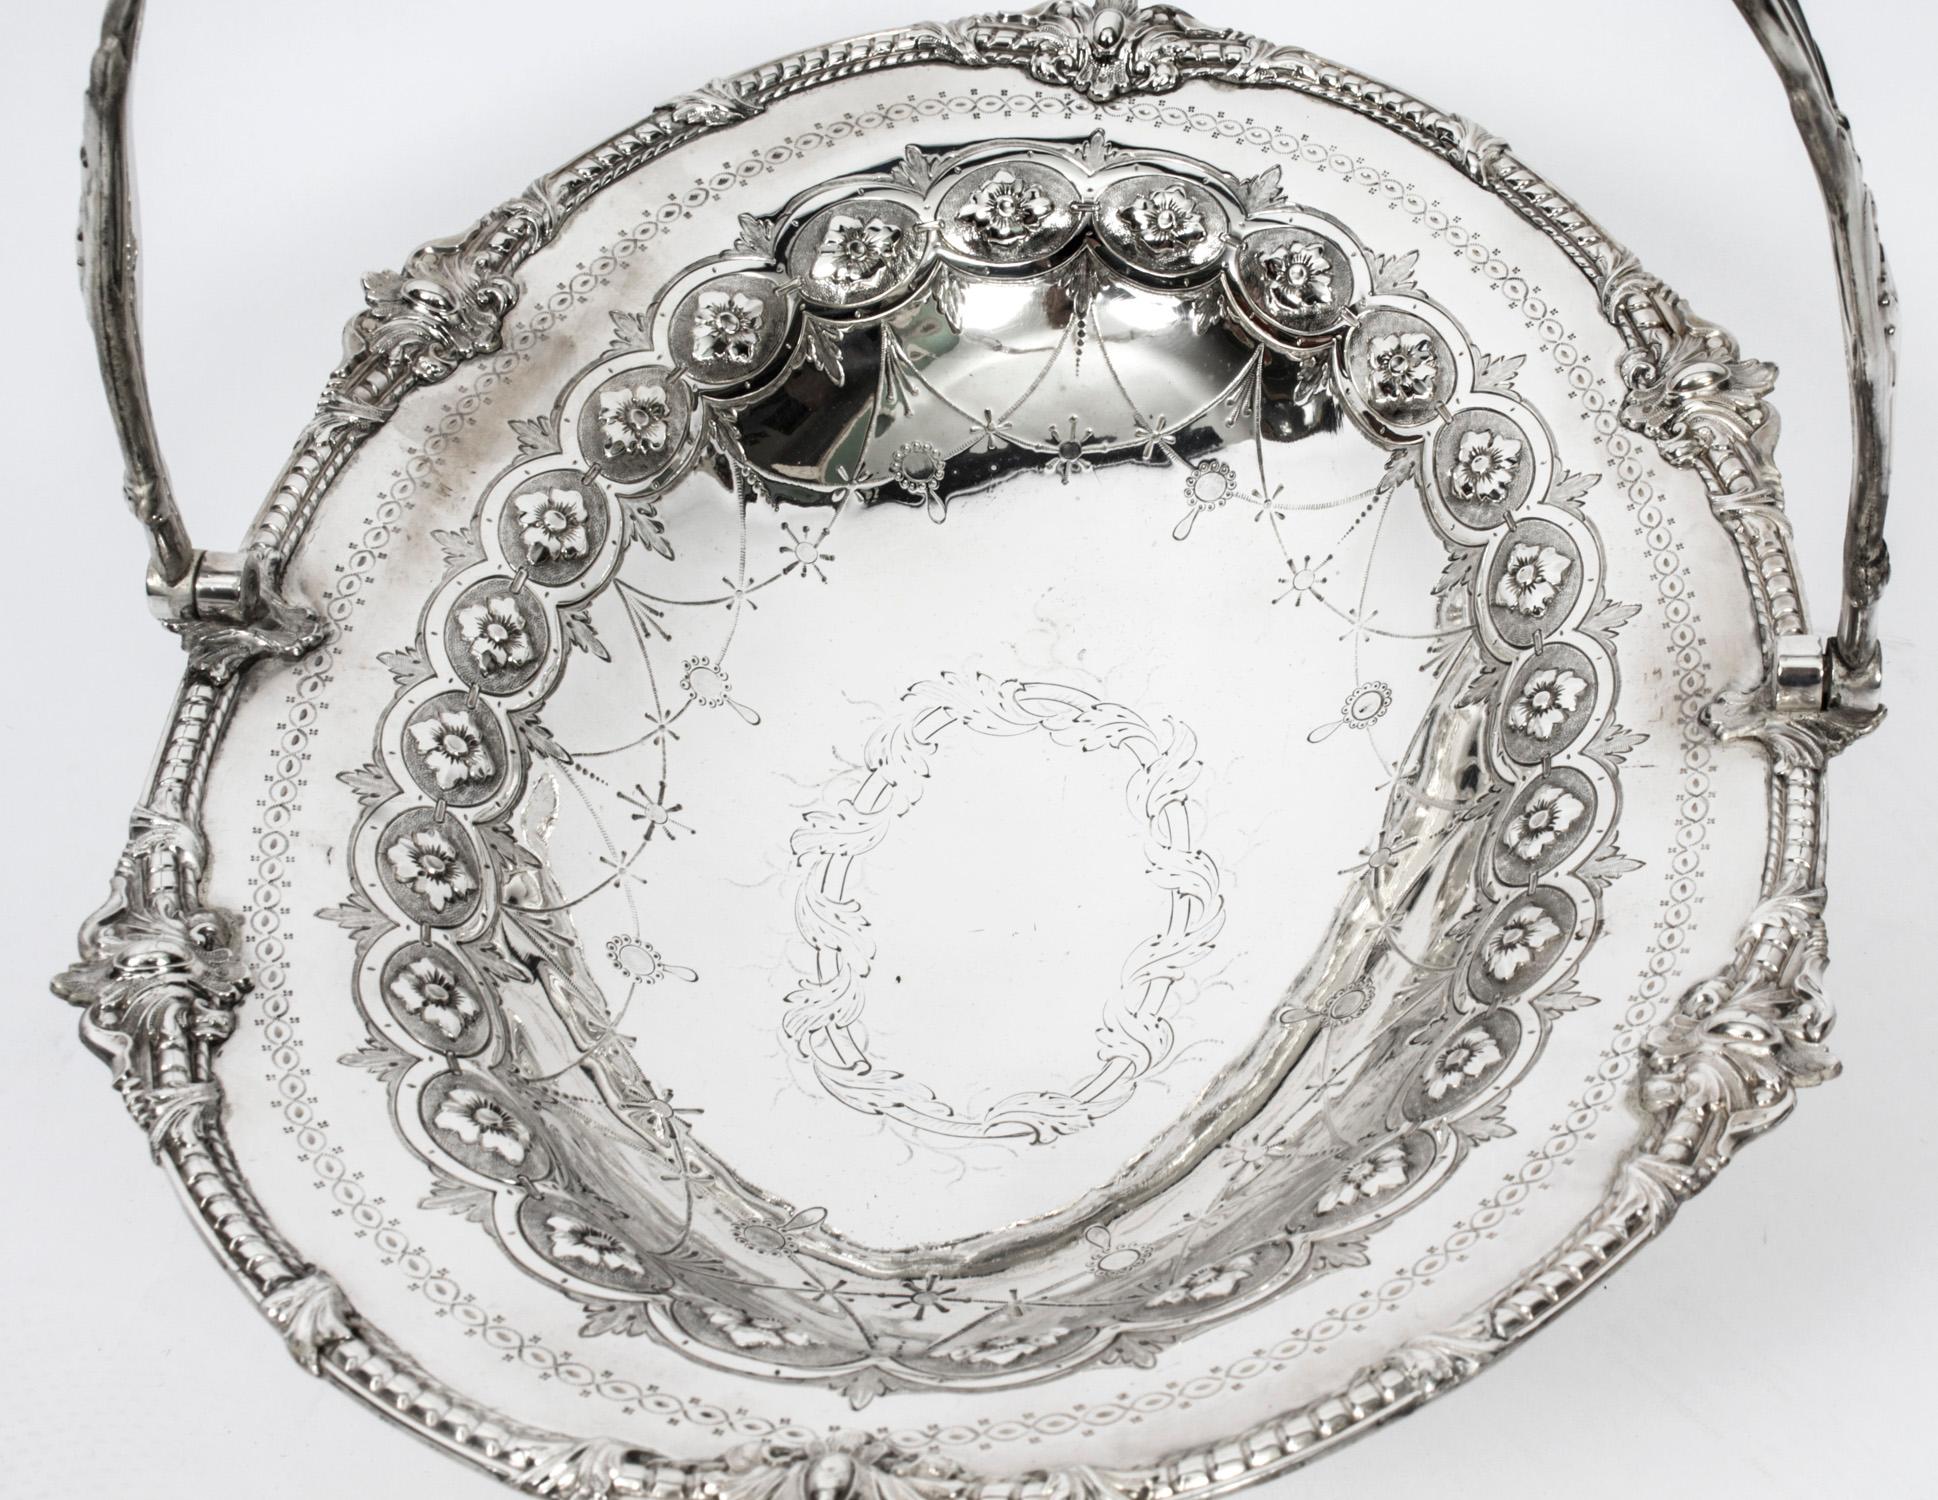 English Antique Silver Plated Fruit Basket by Henry Atkins & Co 19th C